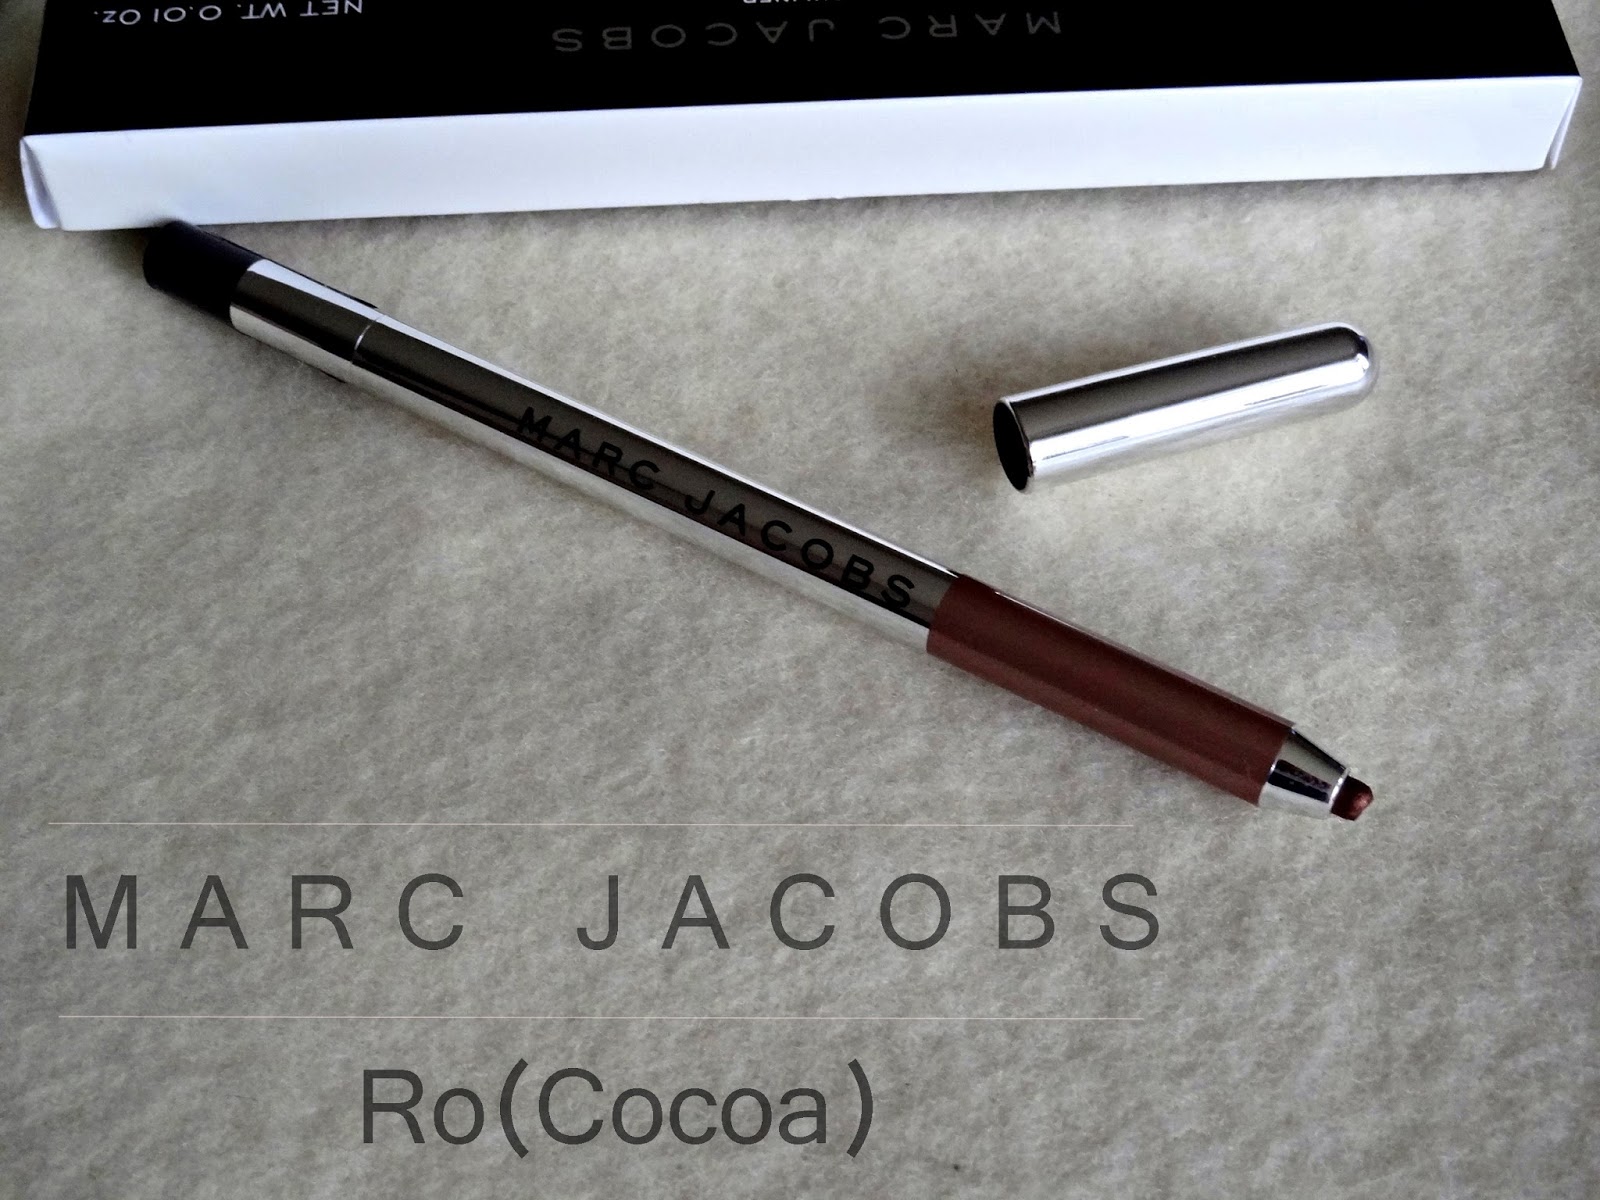 Marc Jacobs Beauty Highliner Gel Eye Crayon in Ro(Cocoa)